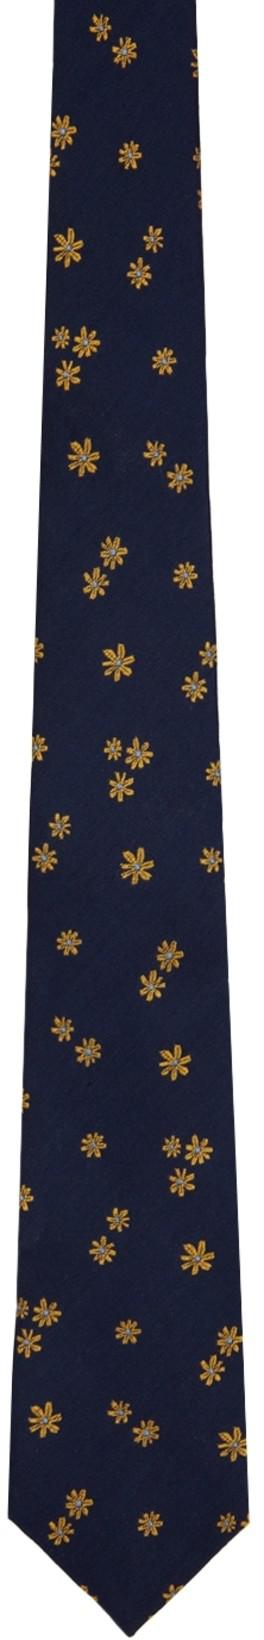 Navy Floral Tie by PAUL SMITH